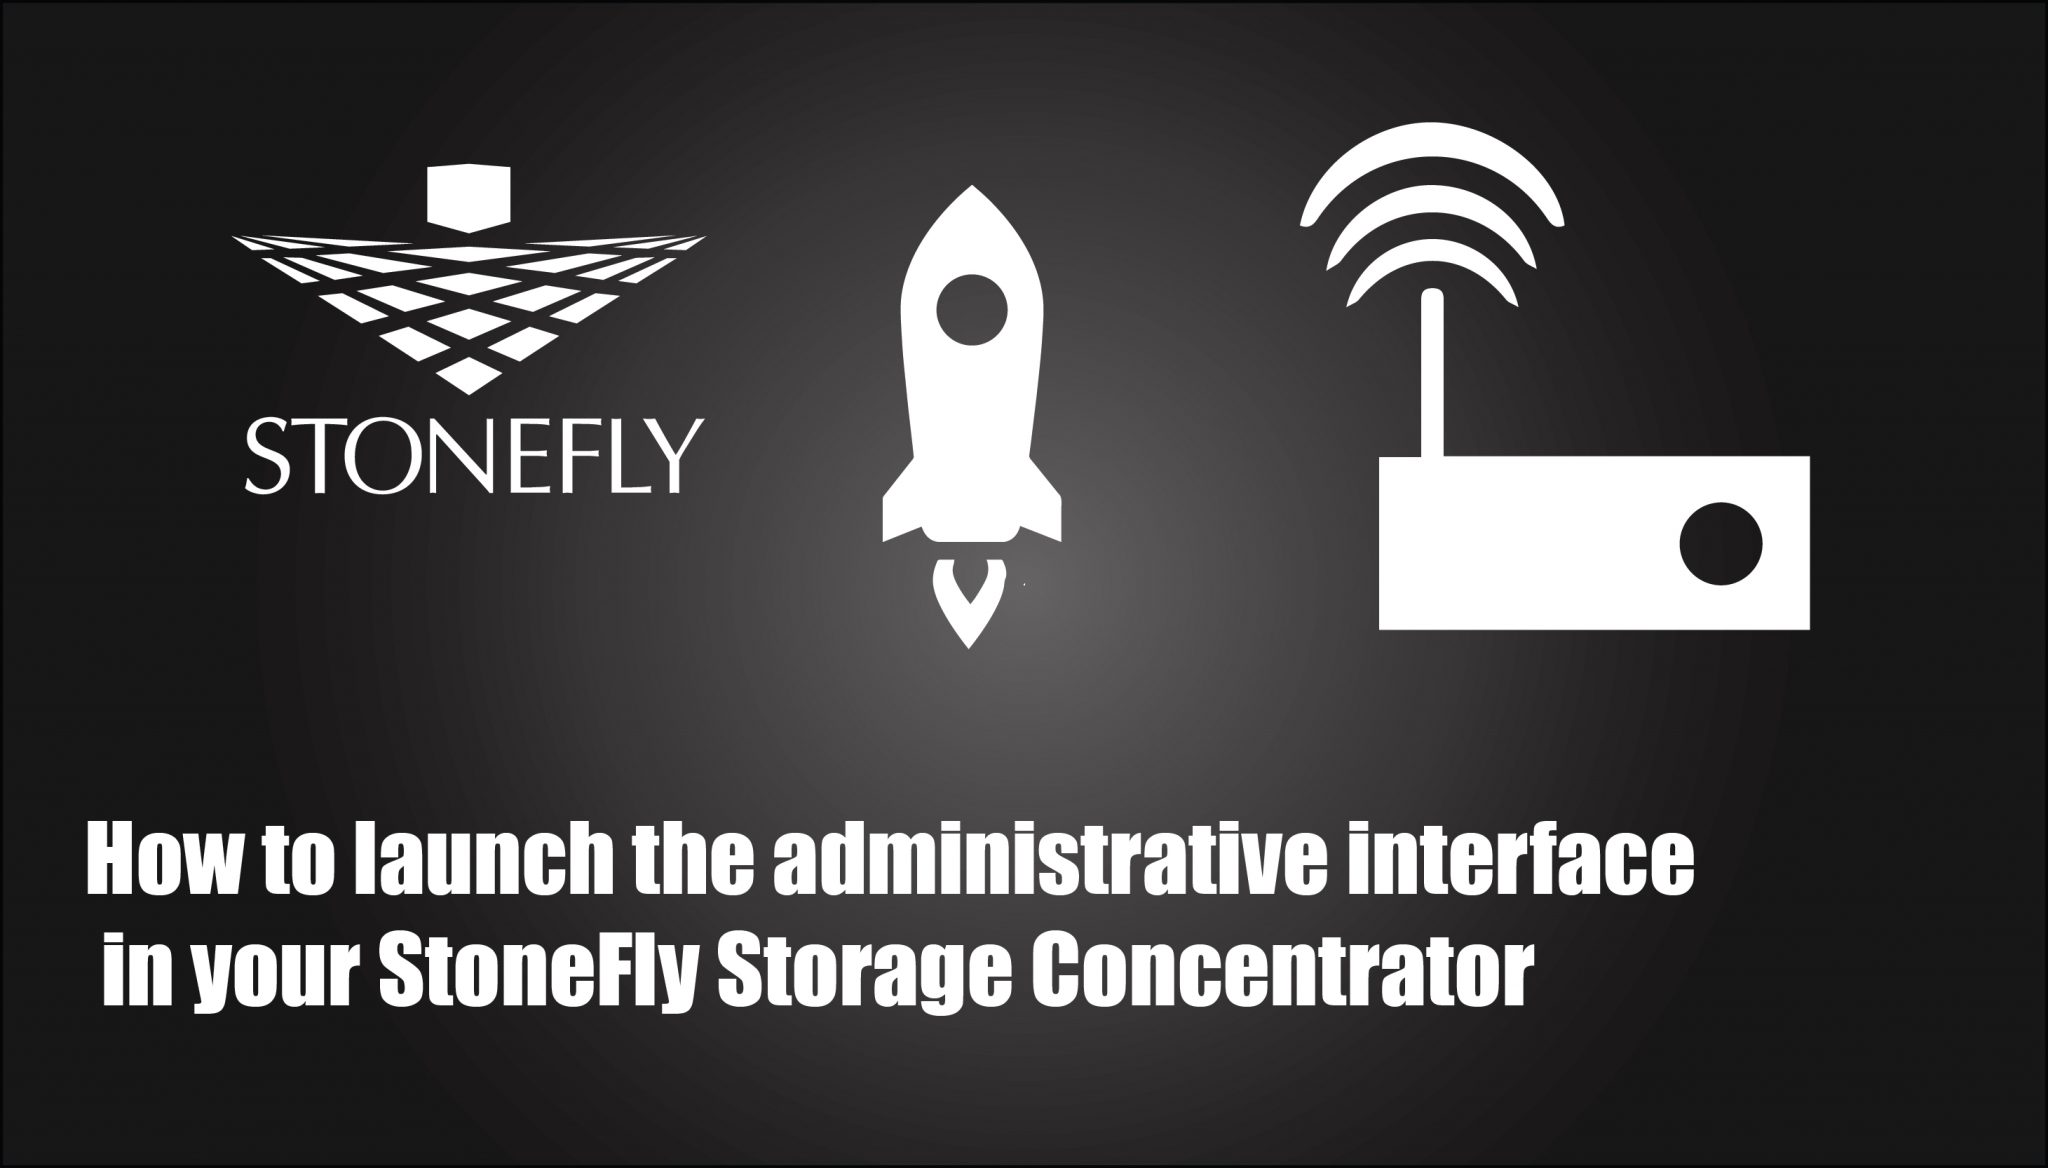 How to launch the administrative interface in your StoneFly Storage Concentrator